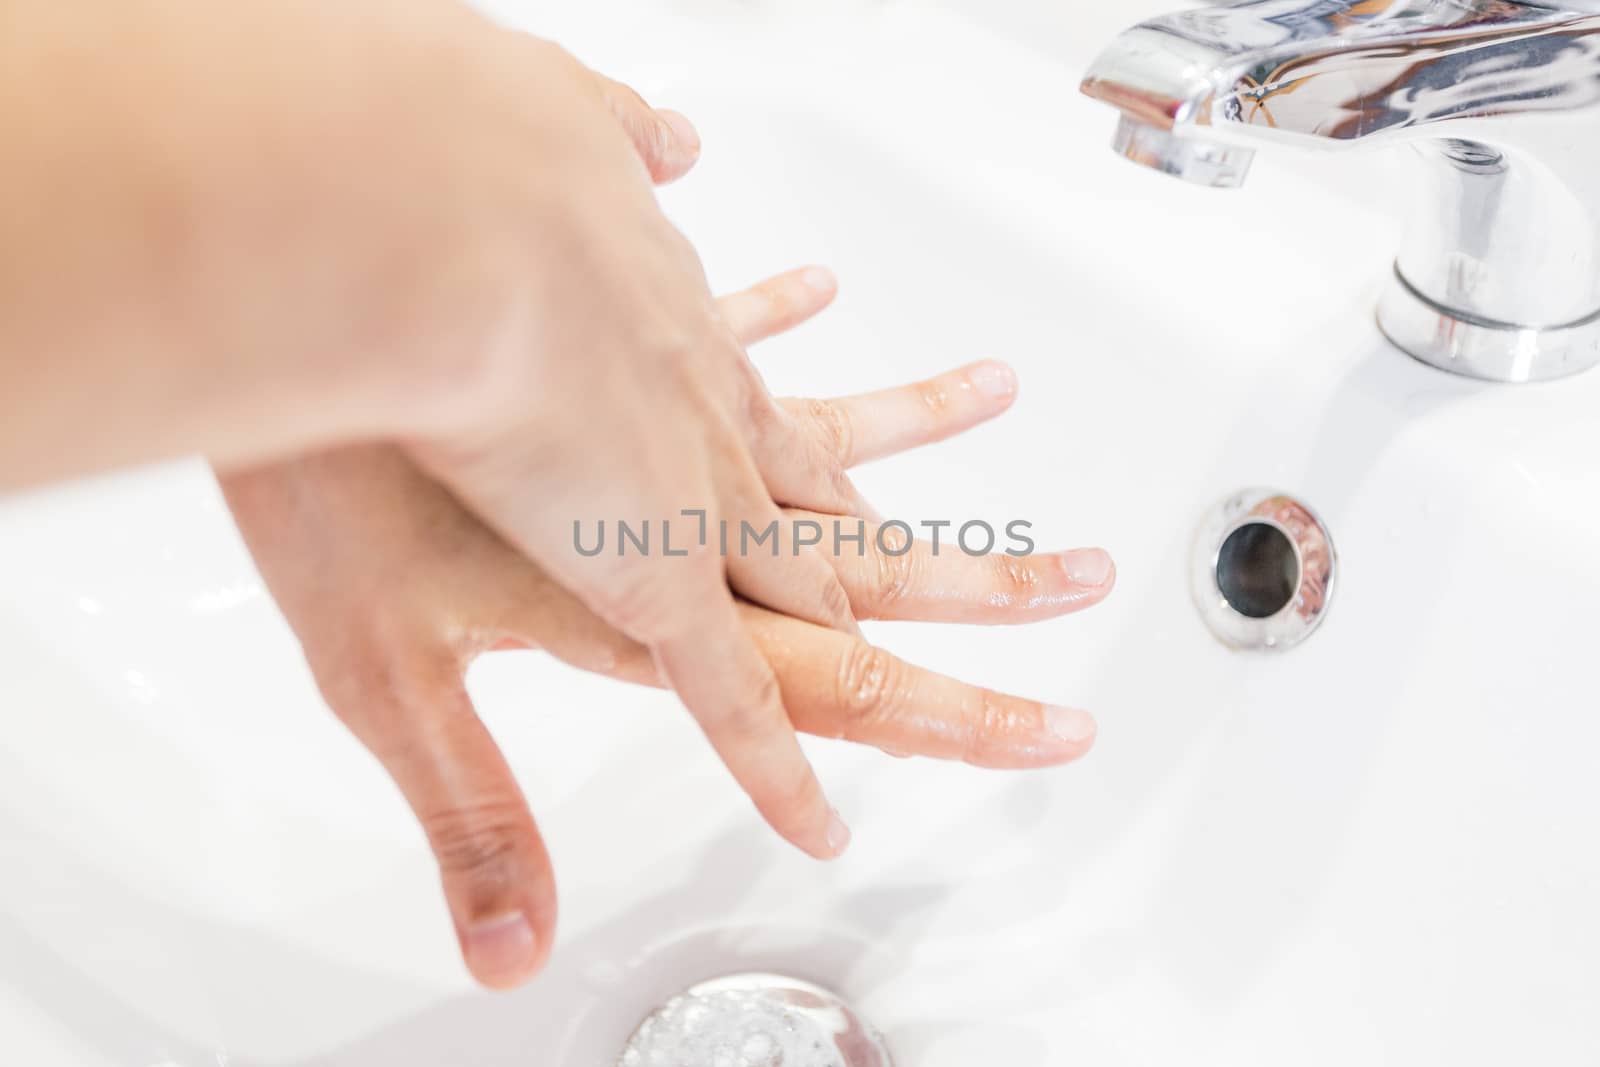 Man washing his hands hygienically under the tap in times of coronavirus